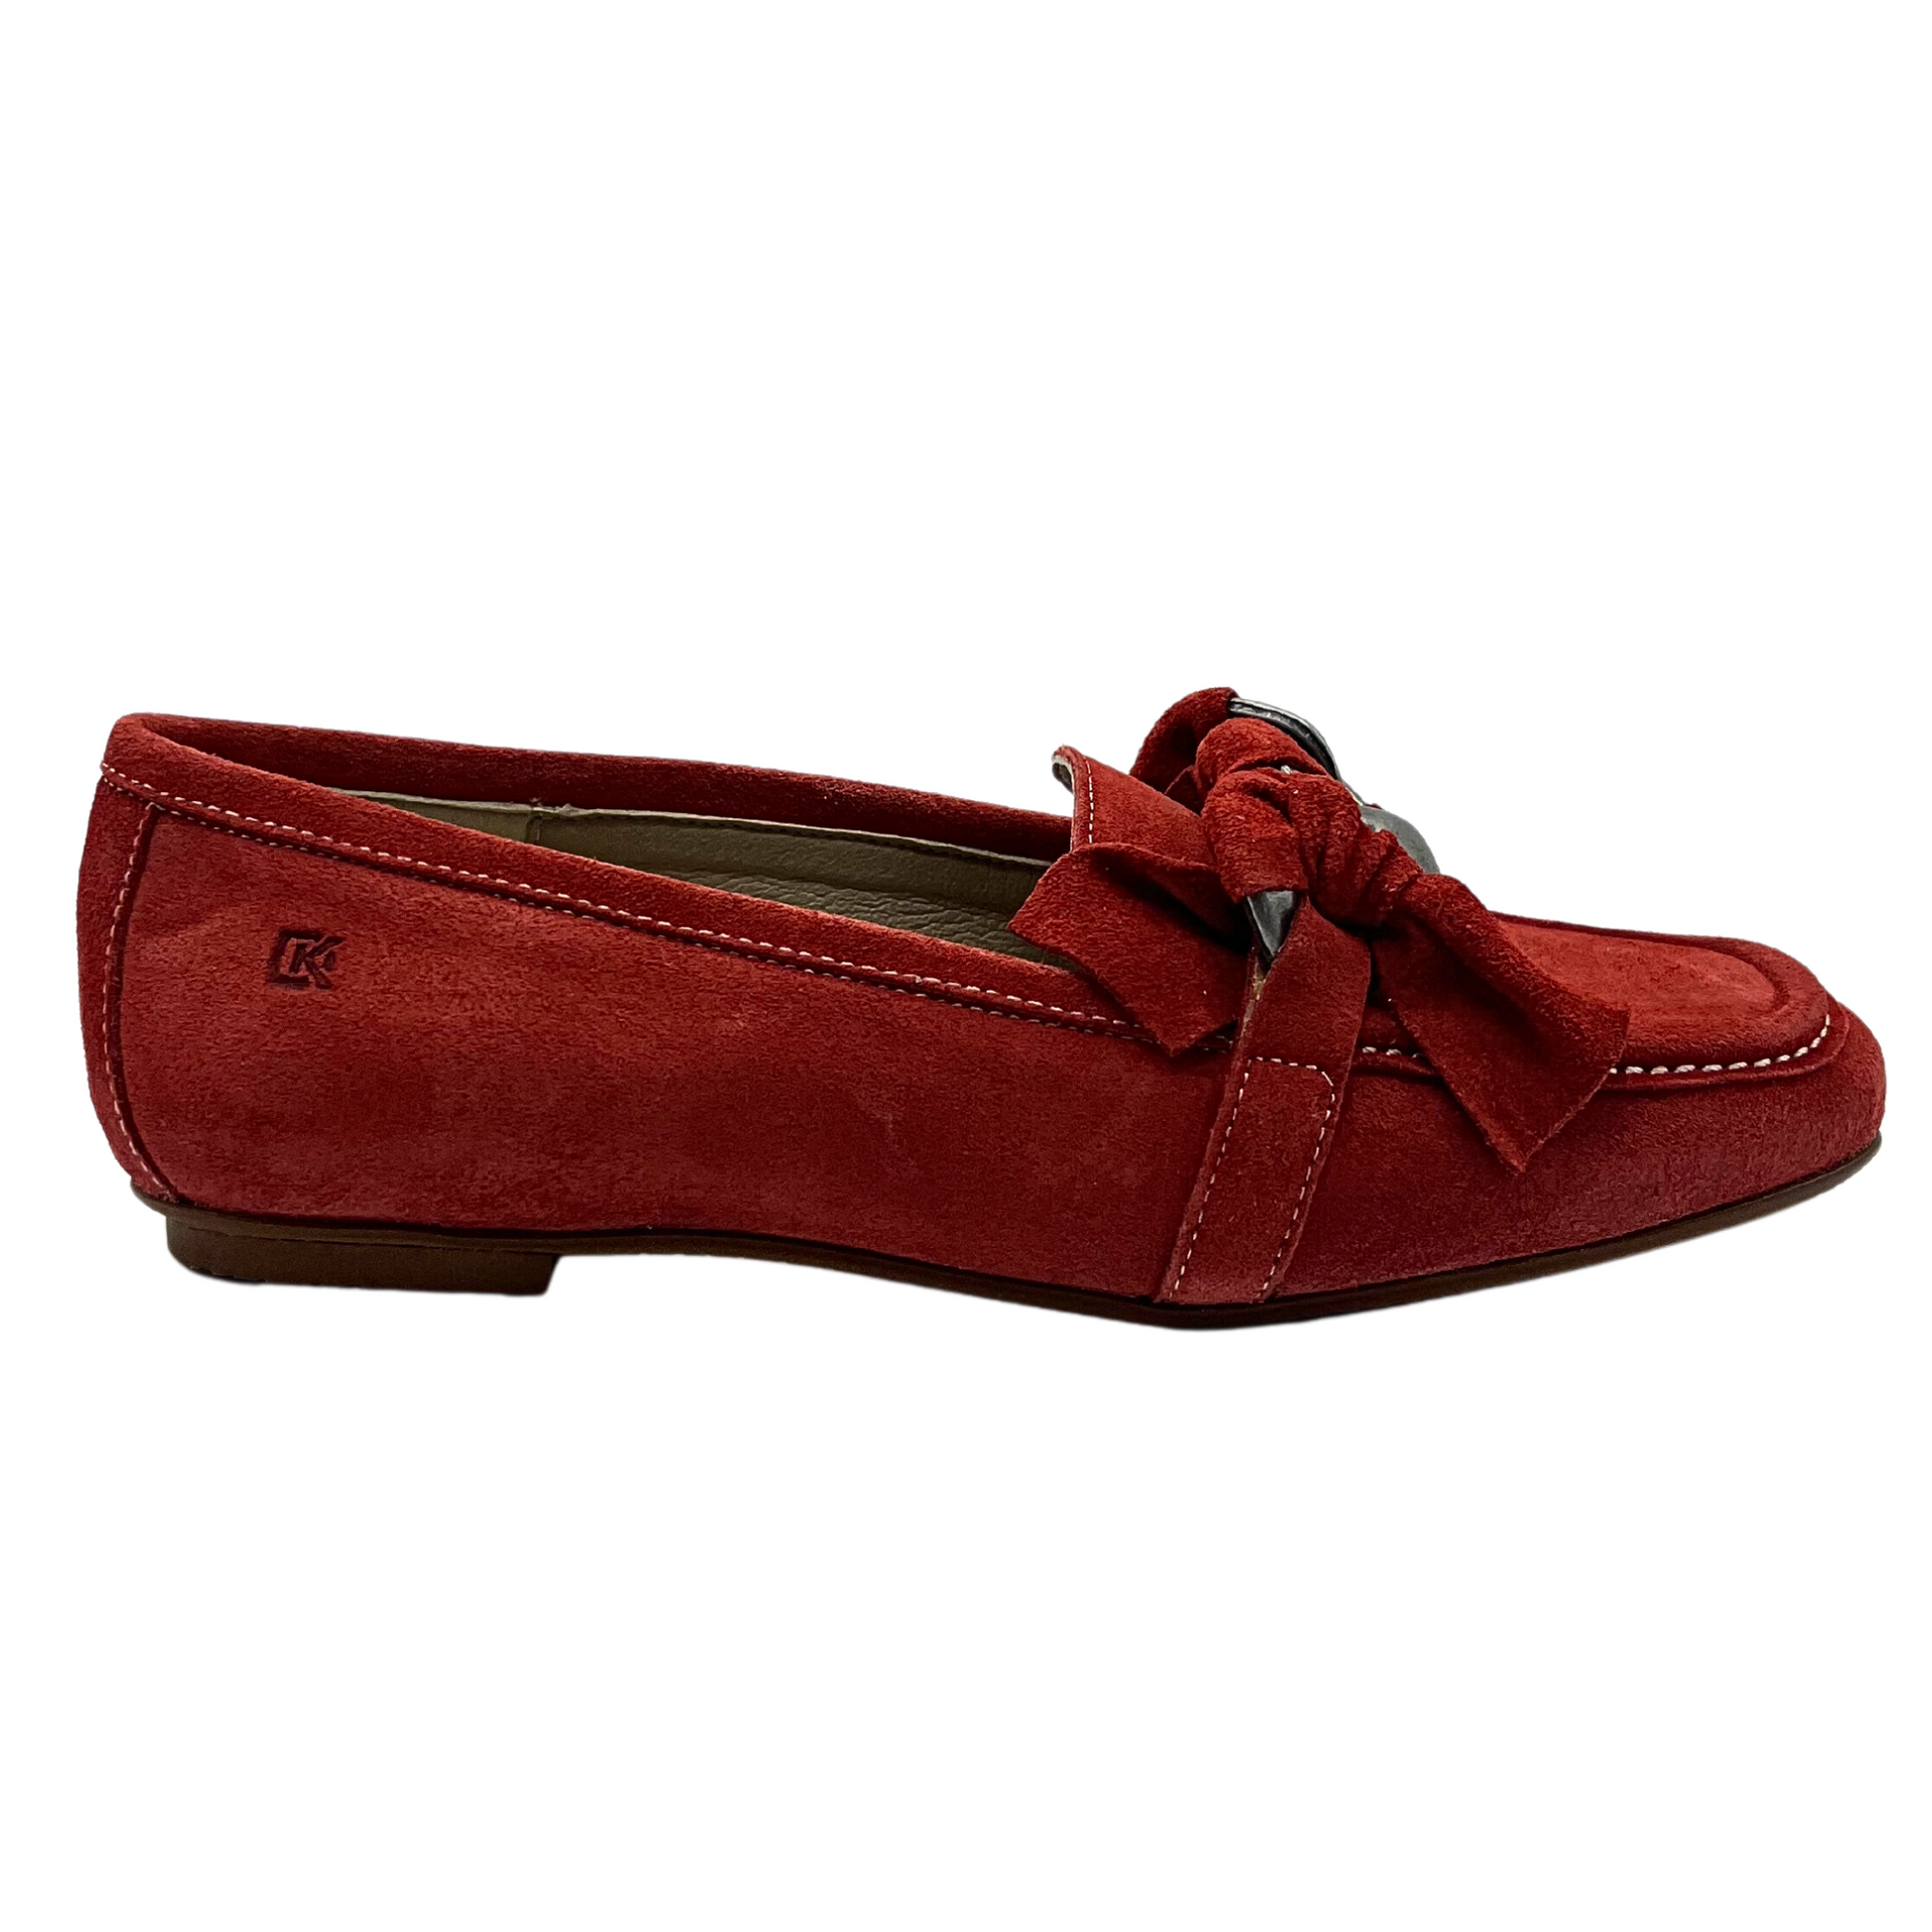 Outside view of a slip on moccasin style loafer.  Over the top of foot is a knotted leather/metal chain detail